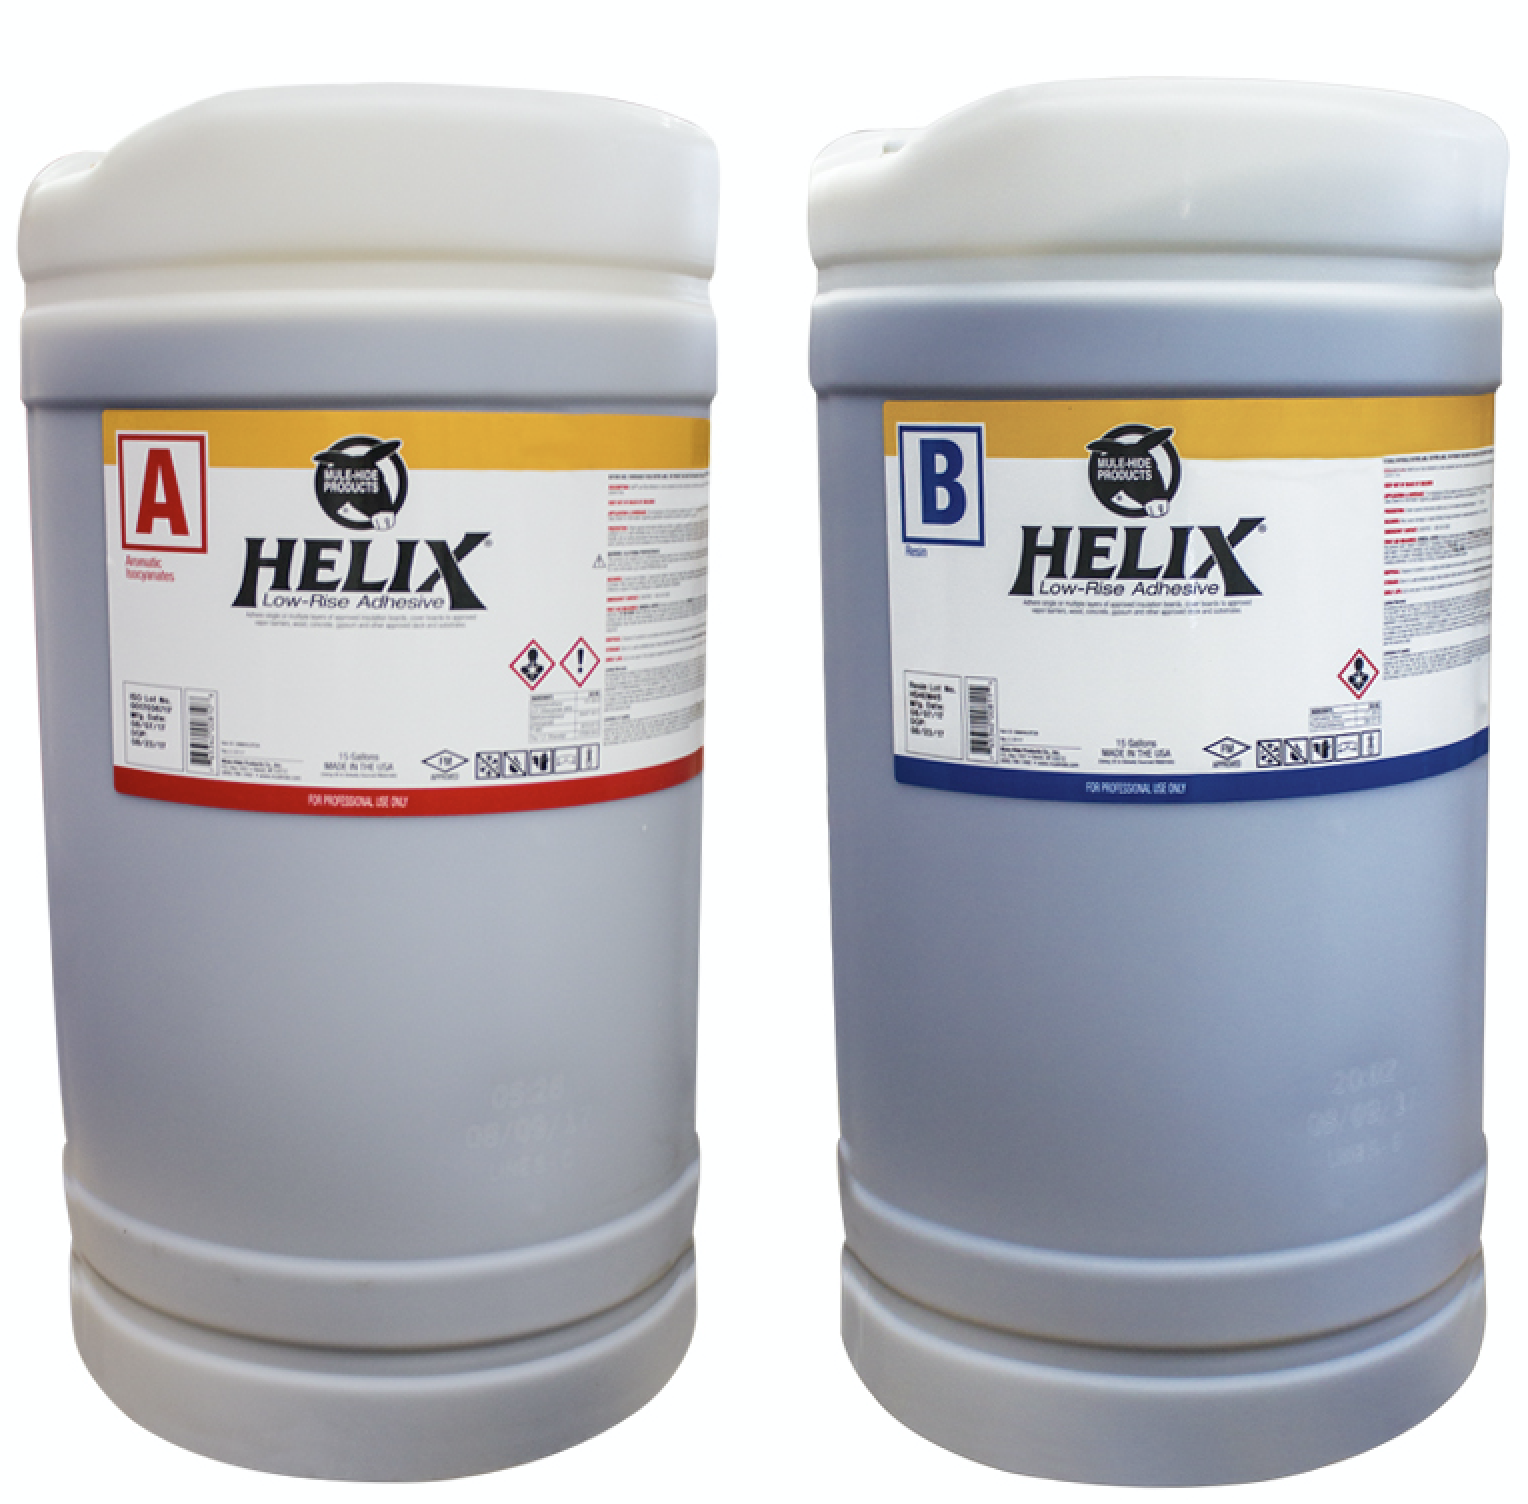 Mule-Hide Products Co. now offers Helix Low-Rise Adhesive in 15-gallon pony kegs and 50-gallon drums for use in completing larger jobs.